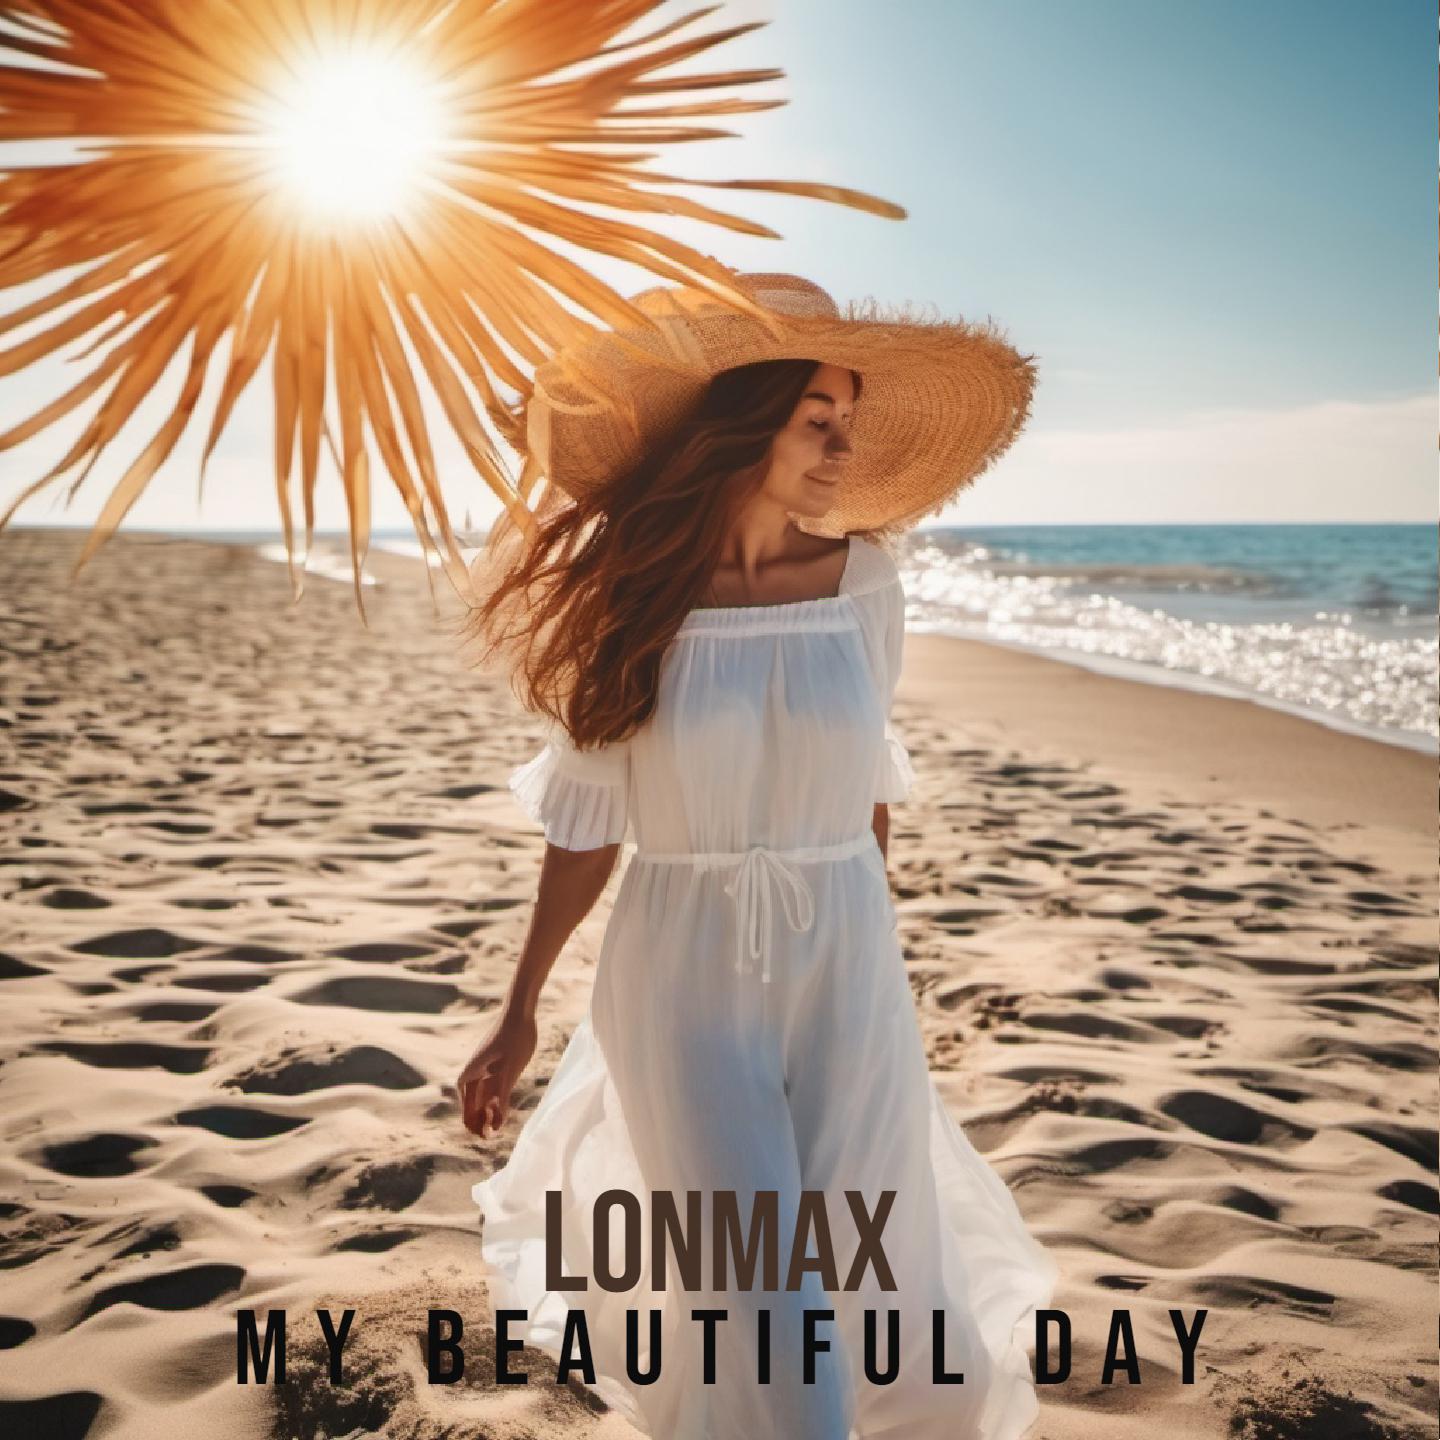 Lonmax - My Beautiful Day (No Drum Mix)